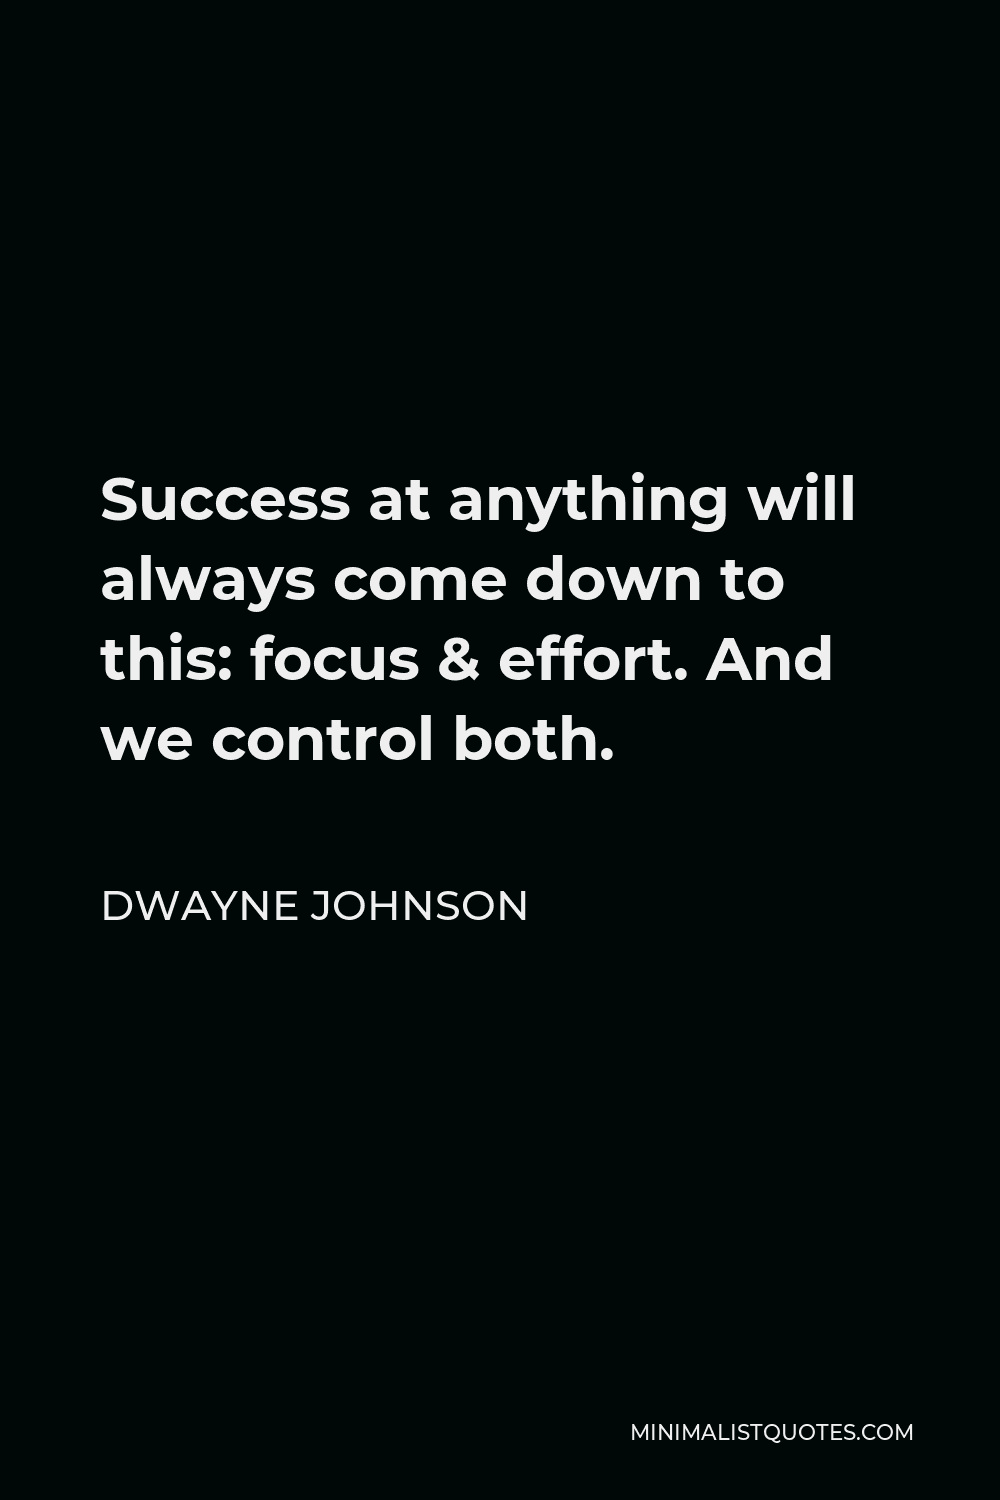 Dwayne Johnson Quote - Success at anything will always come down to this: focus & effort. And we control both.